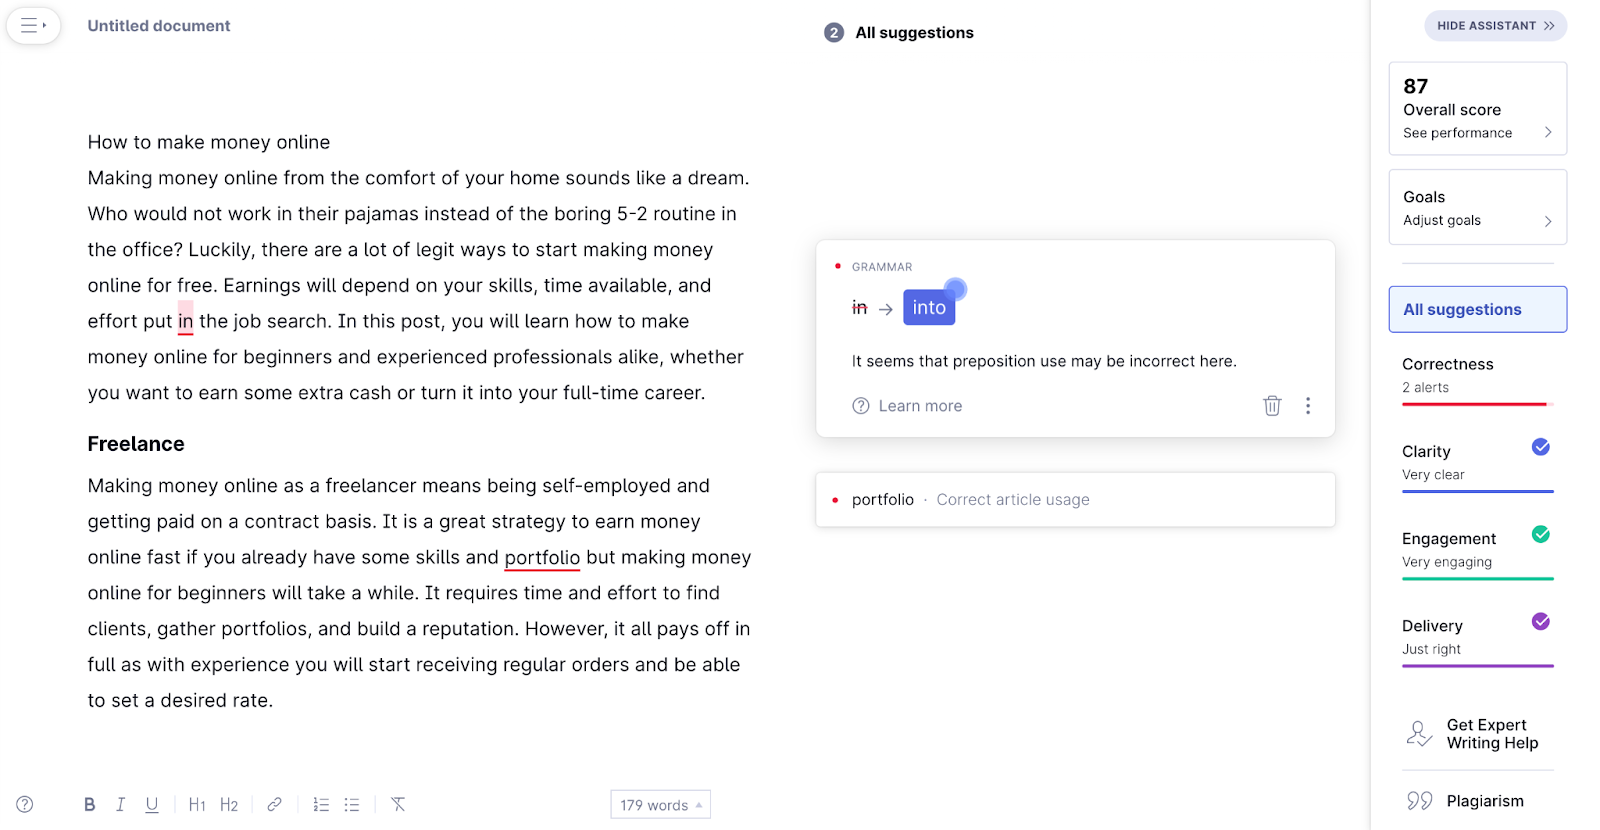 A screenshot of the Grammarly dashboard with content suggestions